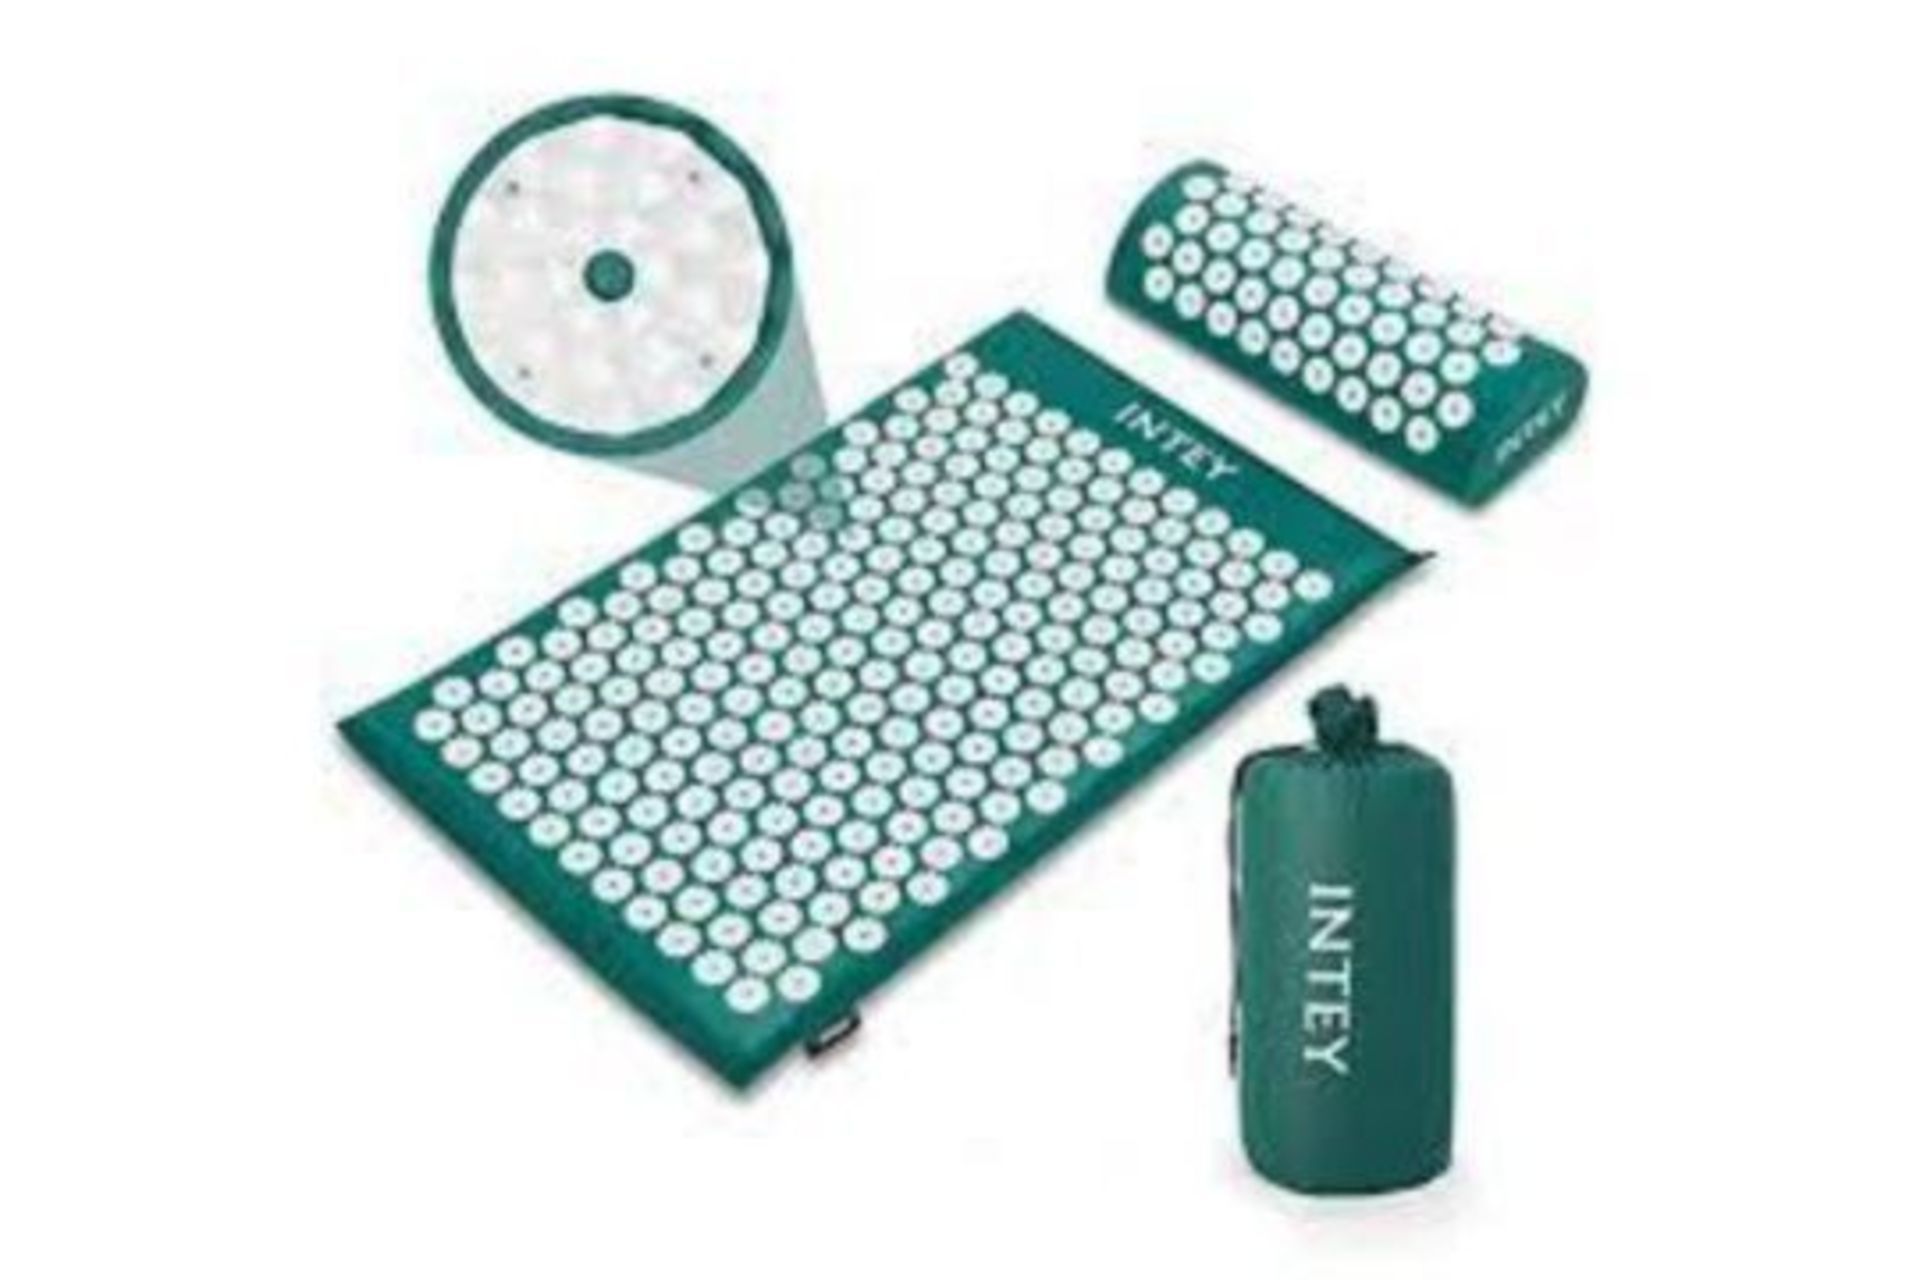 15 X BRAND NEW GREEN PROFESSIONAL ACUPUNCTURE PAD SETS WITH MAT AND PILLOW IN CARRY CASE RRP £30